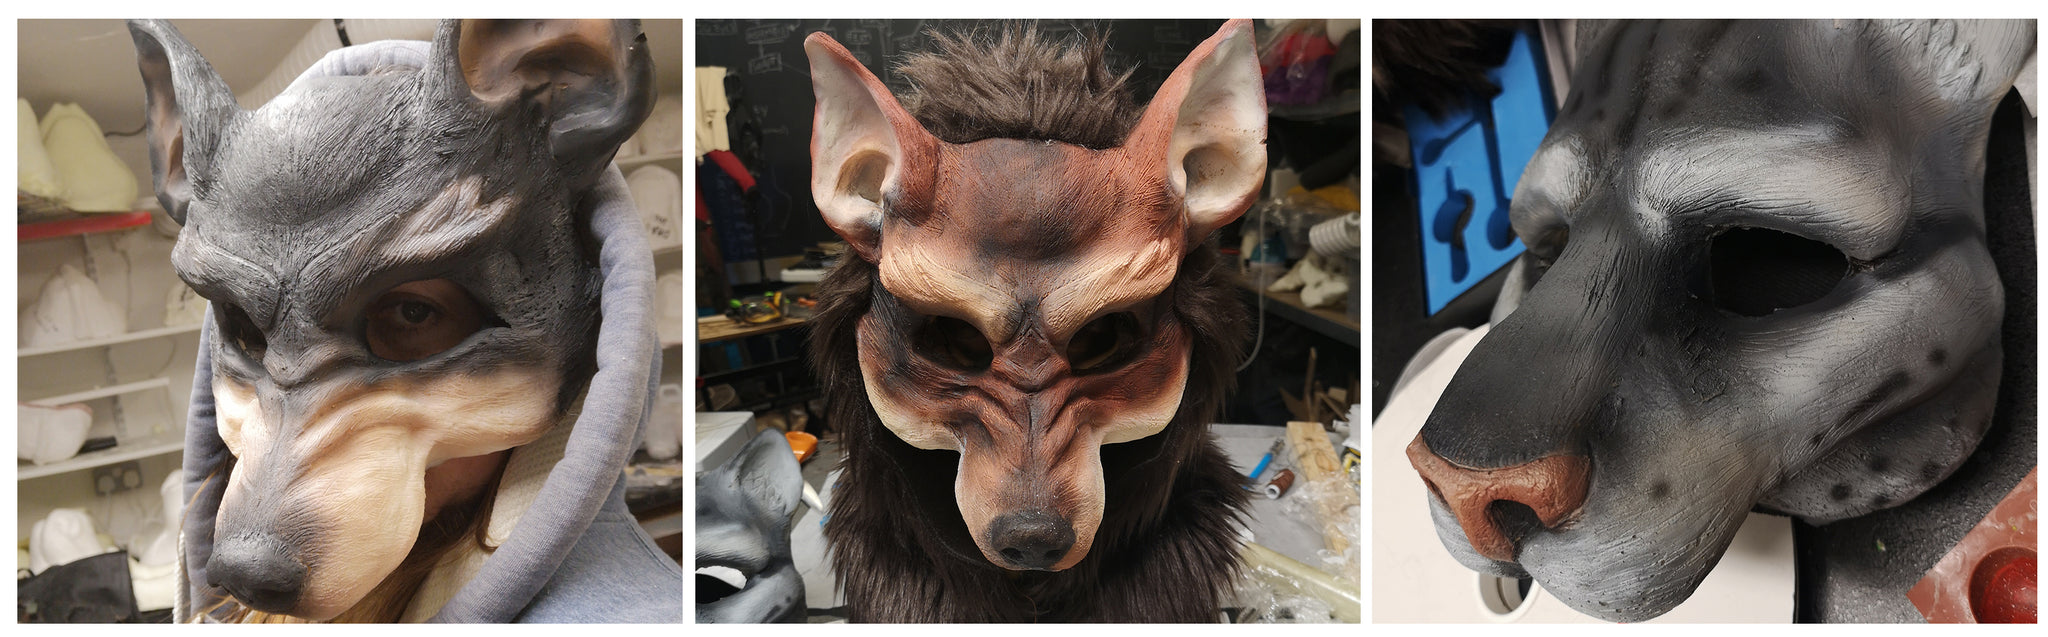 Images of the wolf mask and feline masks painted in realistic patterns. the first wolf is painted grey with tan muzzle, the second wolf is reddy brown with an added fur hood, finally the feline is grey with white striped detailing